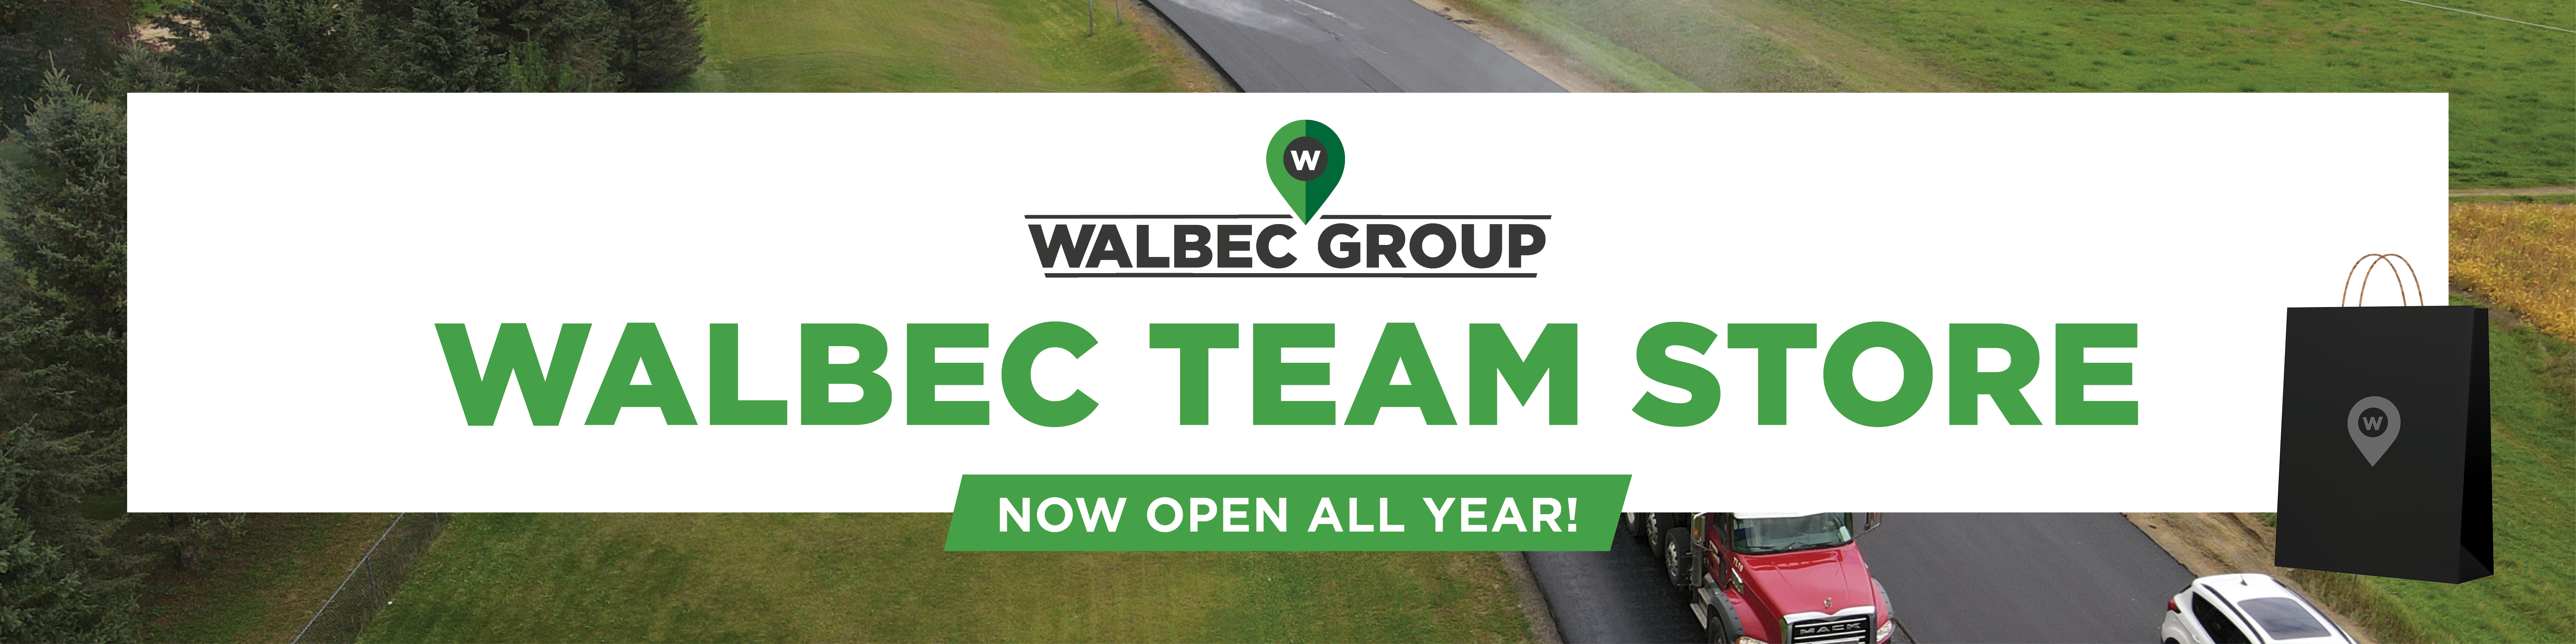 Welcome to the Walbec Team Store!